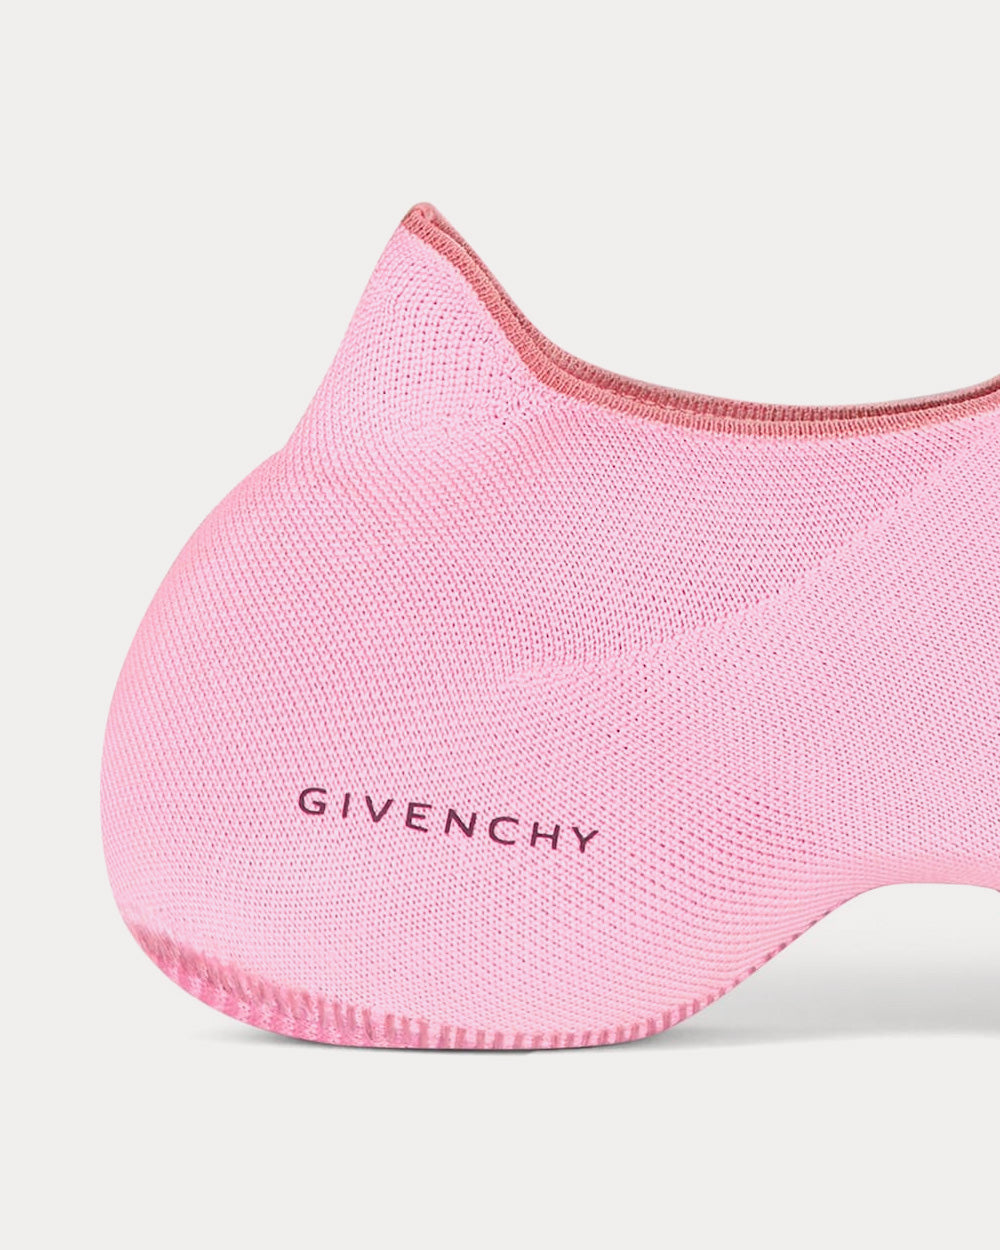 Givenchy TK-360 Knit Light Pink Low Top Sneakers - Sneak in Peace